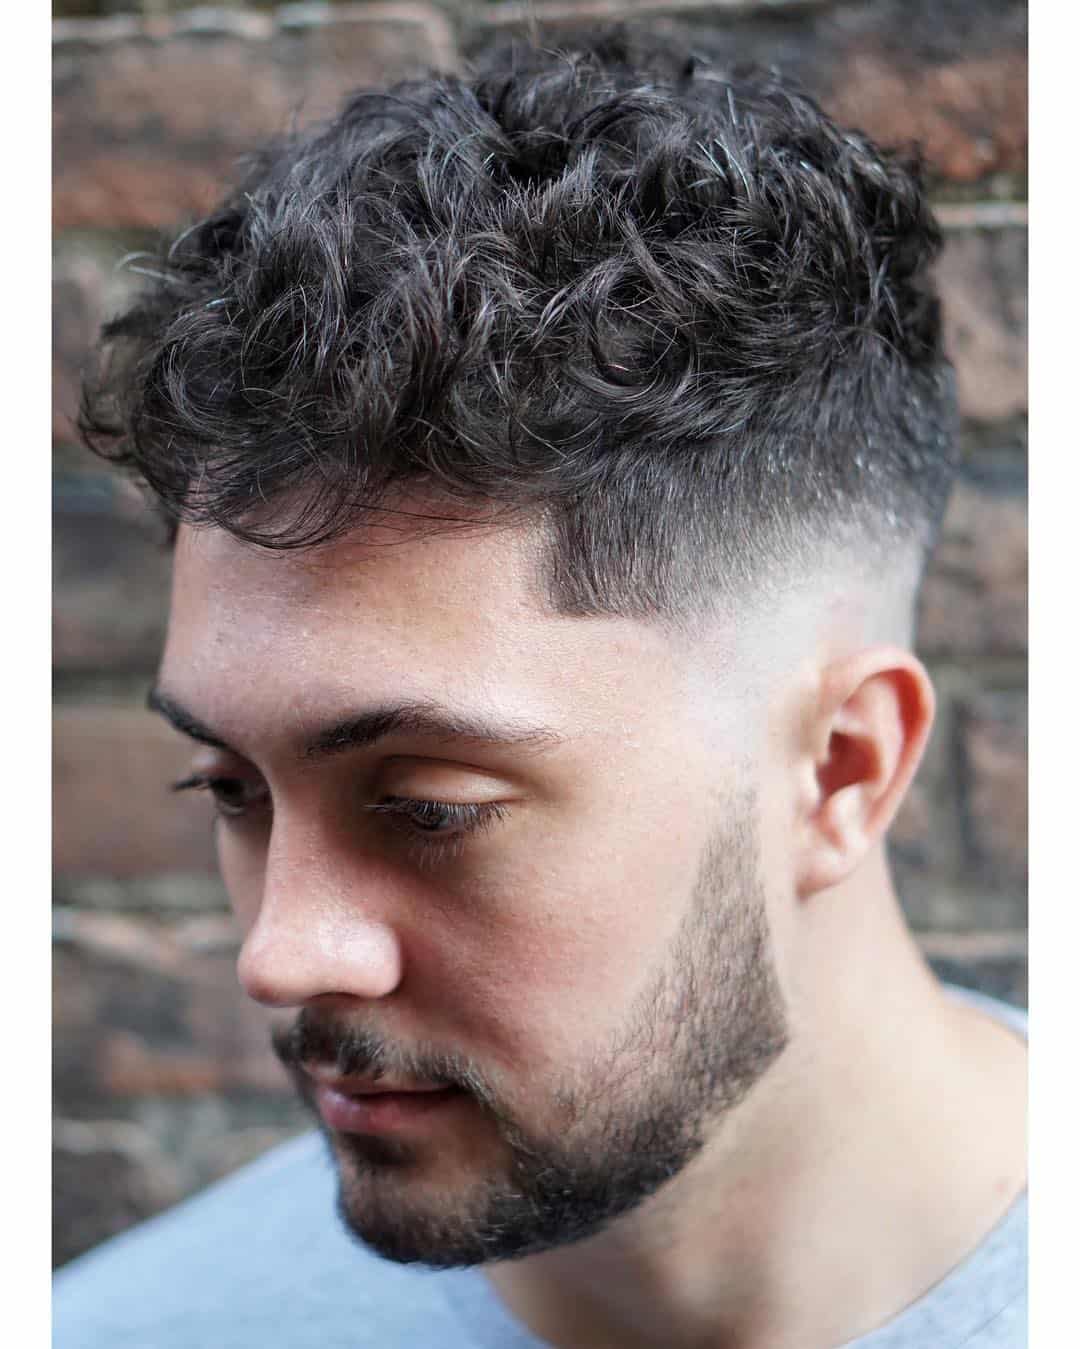 65 Best Men's Messy Hairstyles - Your Uniqueness [2020]